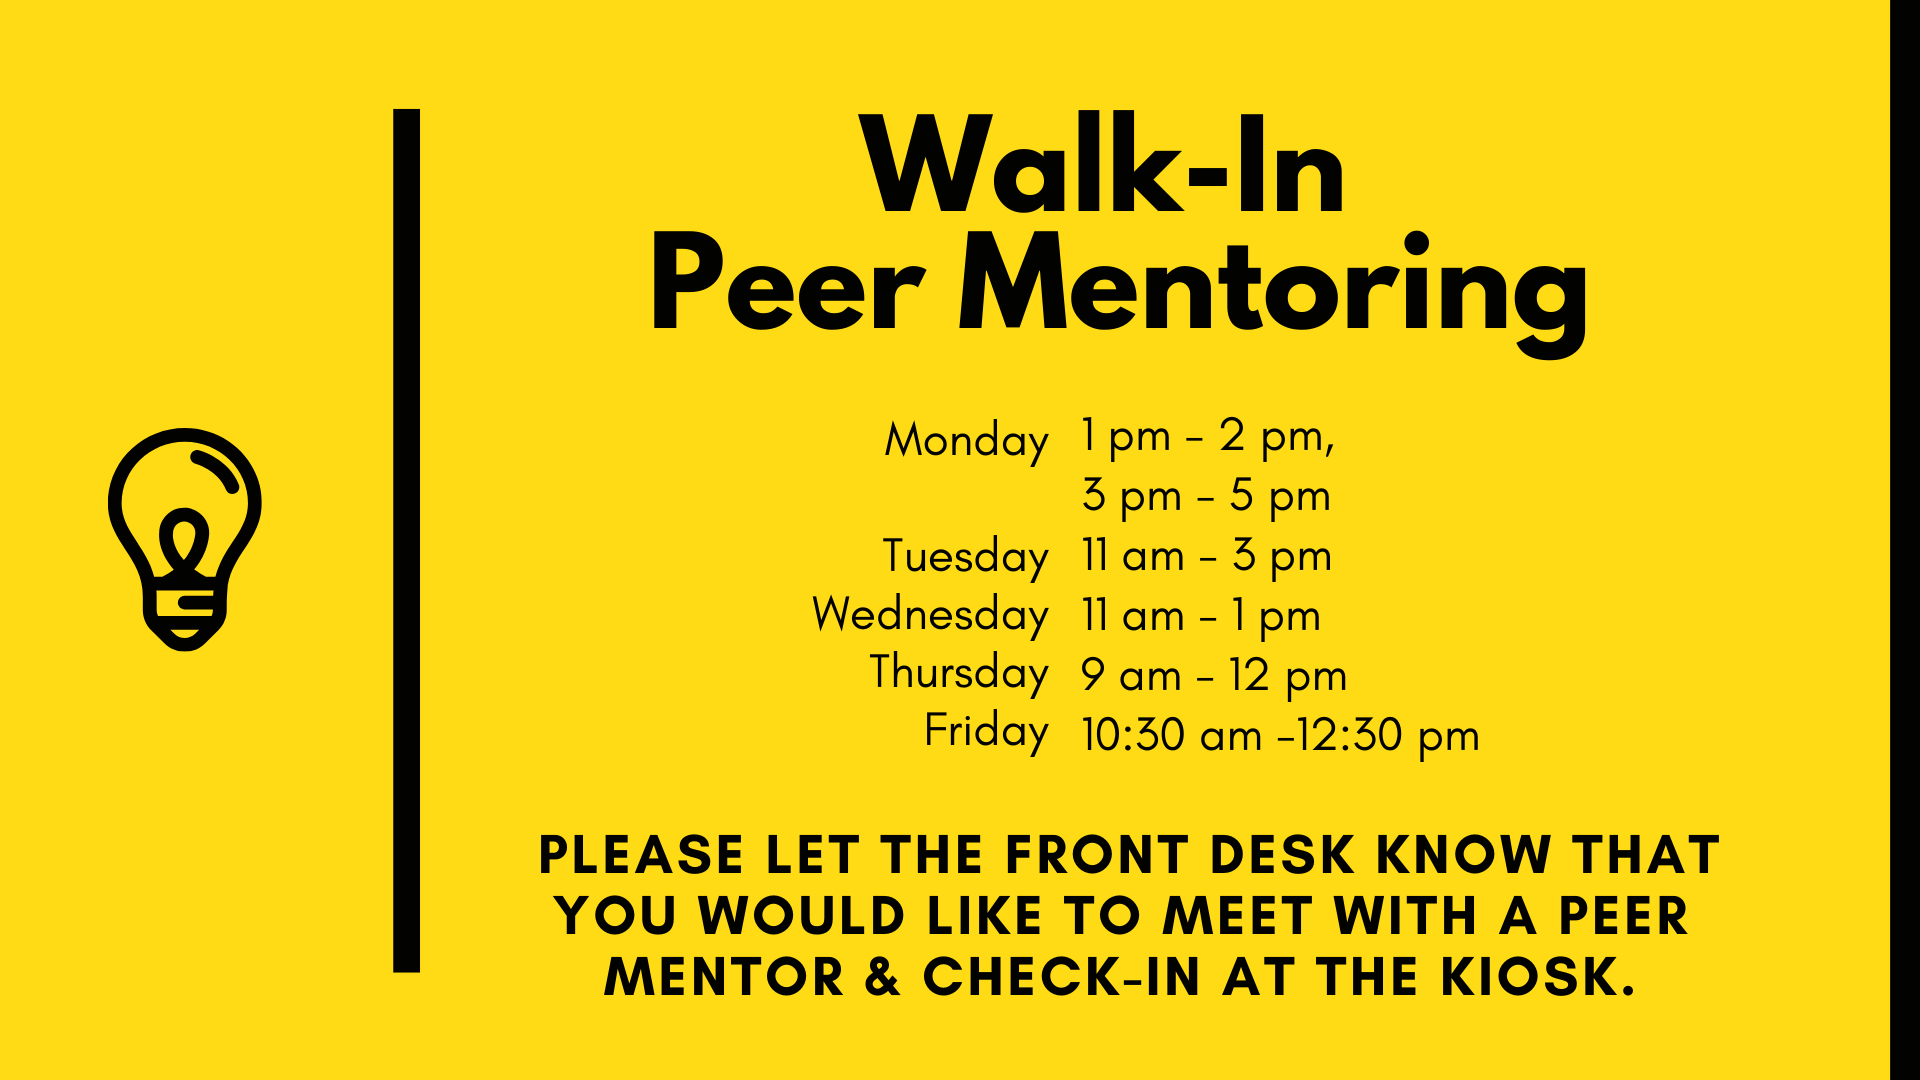 Walk-In Peer Mentoring: Monday 1pm-2pm, 3pm-5pm; Tuesday 11am-3pm; Wednesday 11am-1pm; Thursday 9am-12pm; Friday 10:30am-12:30am. Please let the front desk know that you would like to meet with a peer mentor & check-in at the kiosk.